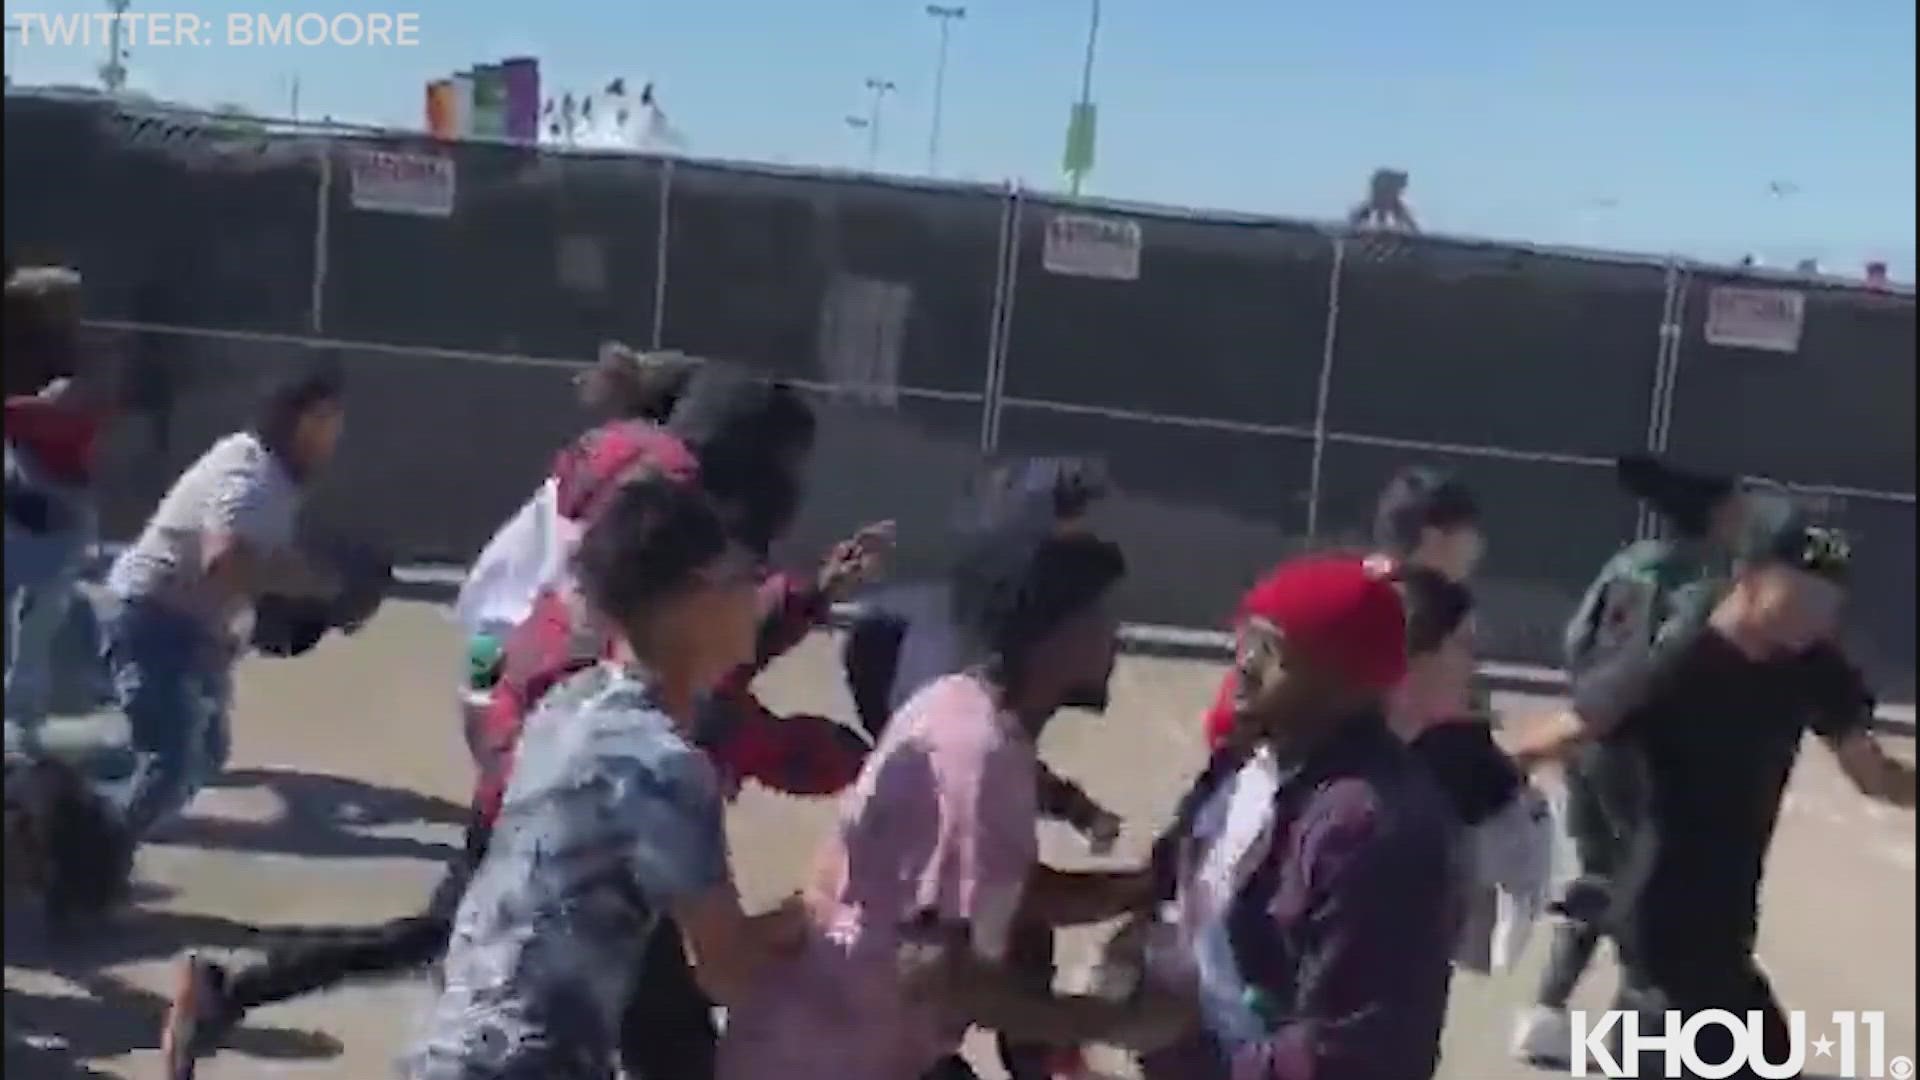 It wasn't a pretty sight to the beginning of Travis Scott's 2-day Astroworld Festival. Video captured festival-goers getting trampled at the entrance gates.